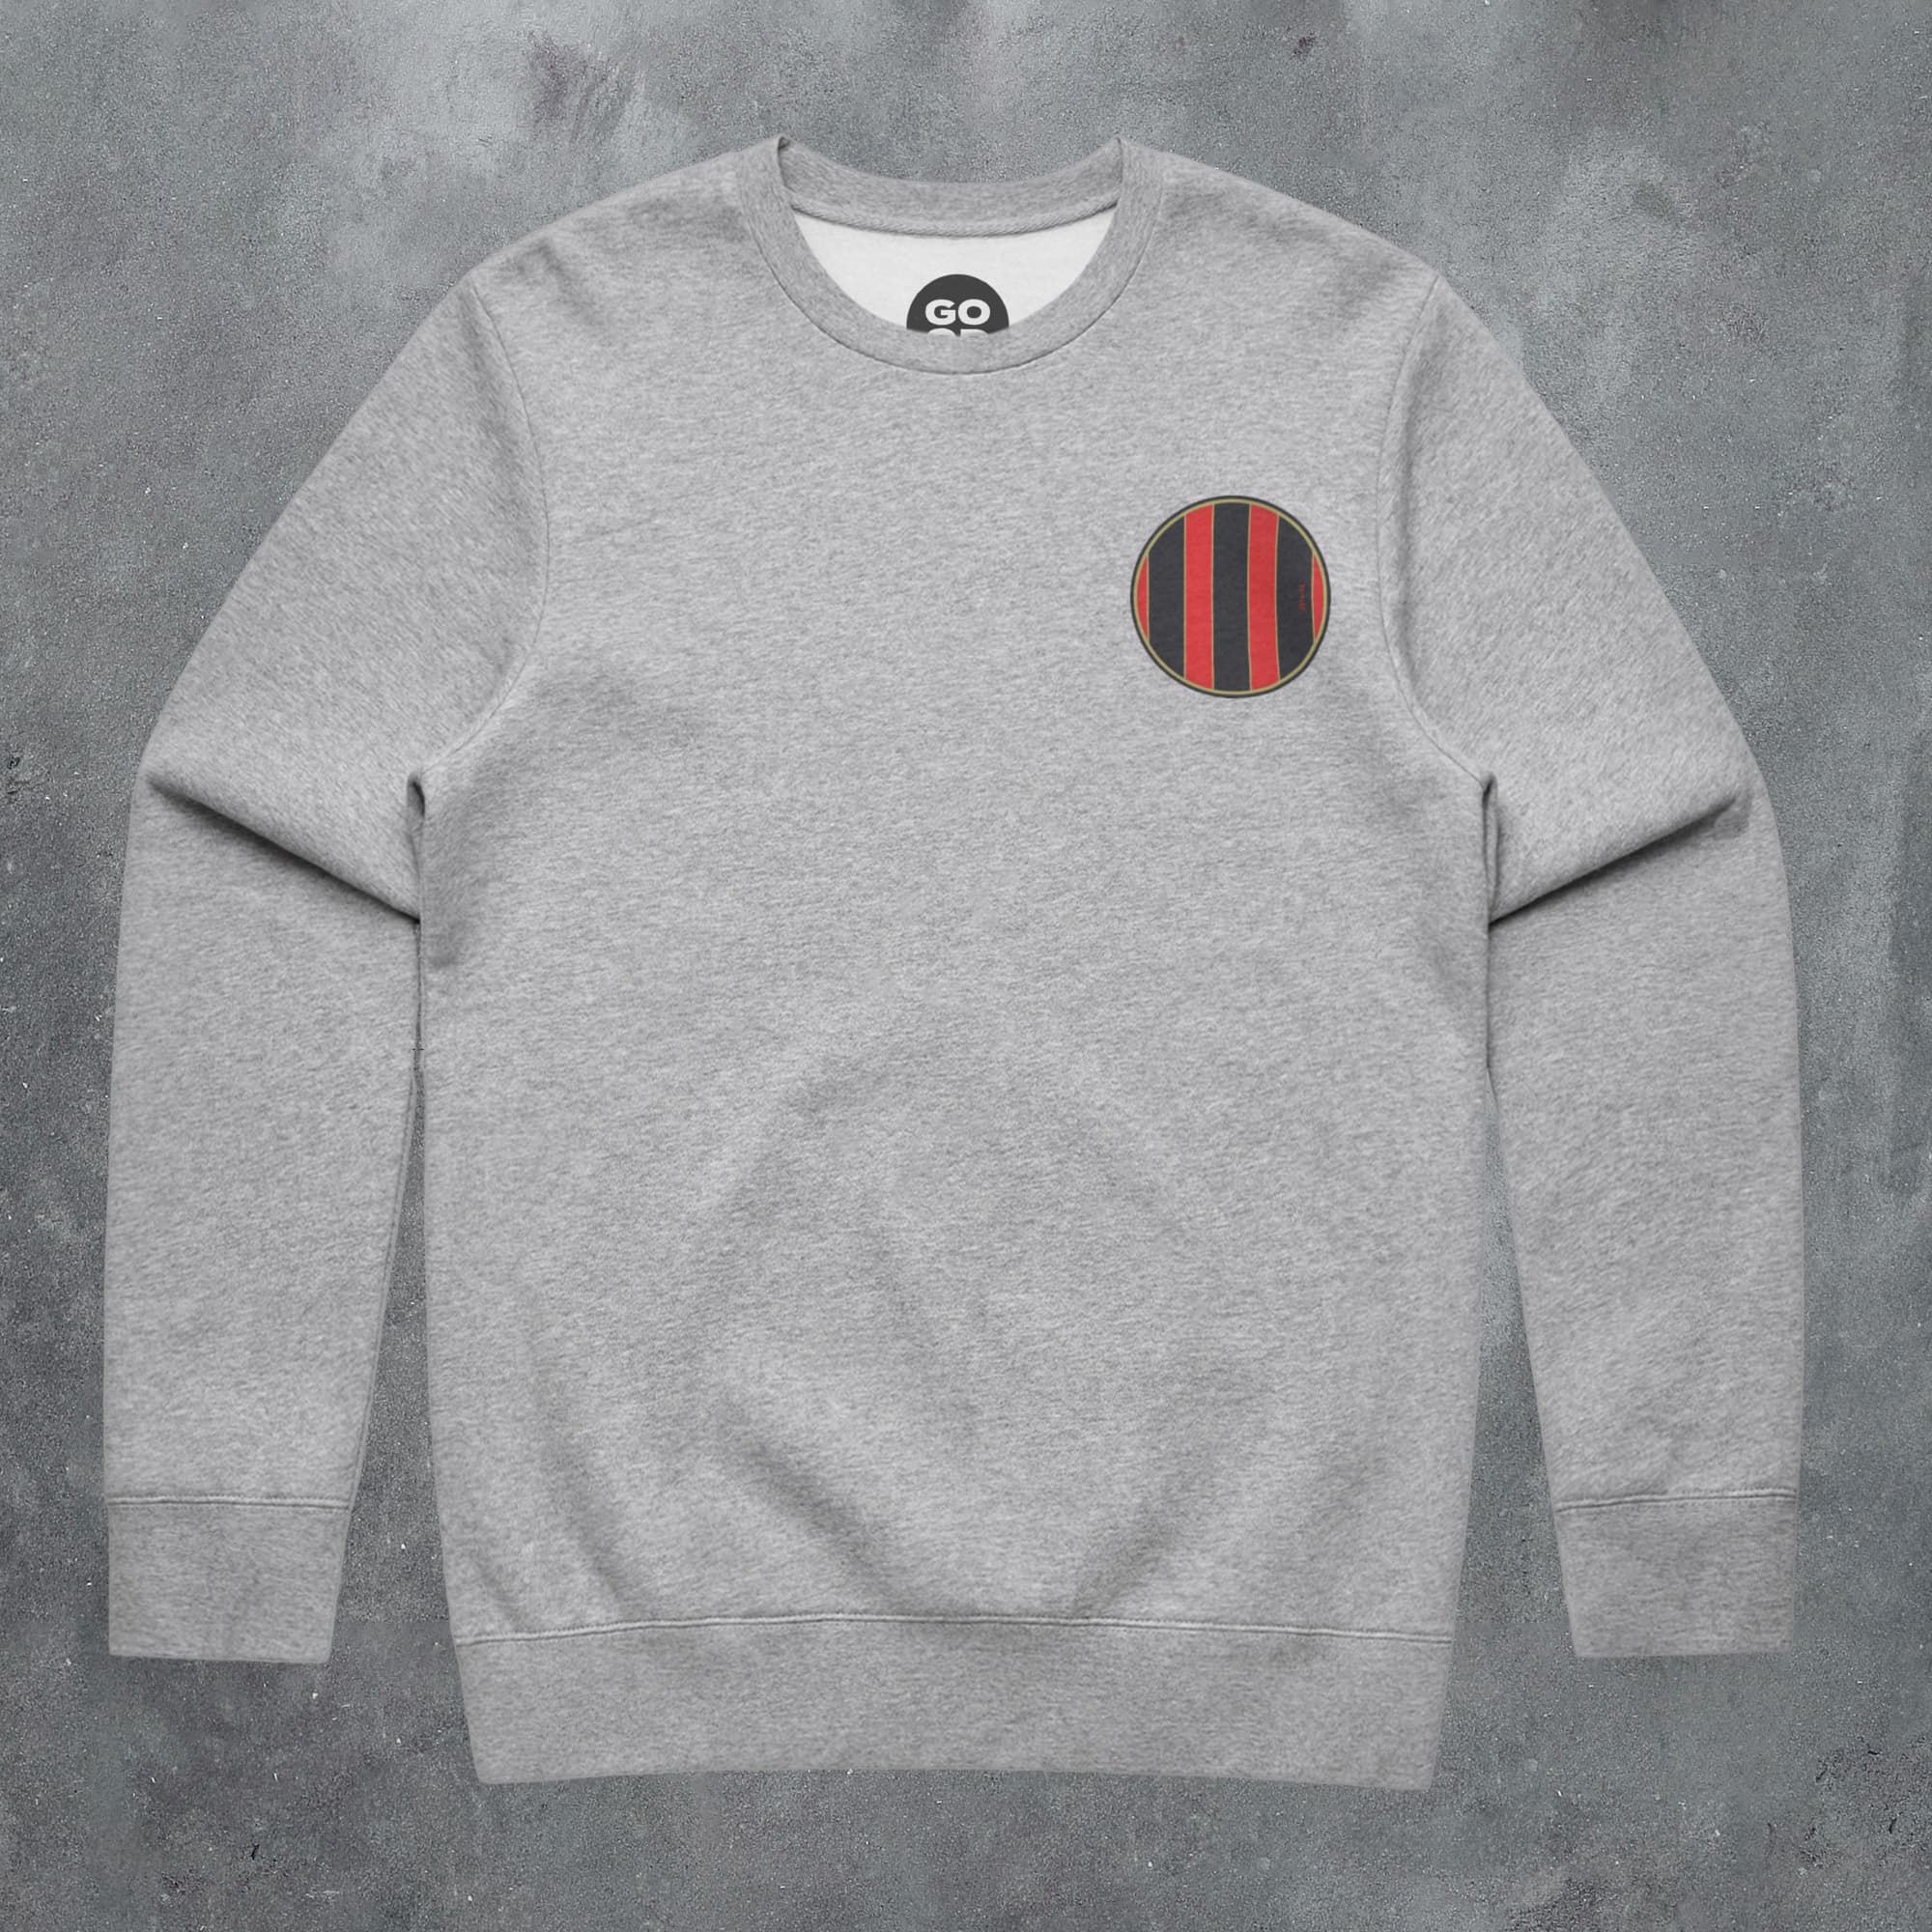 a grey sweatshirt with a red and black stripe on the chest